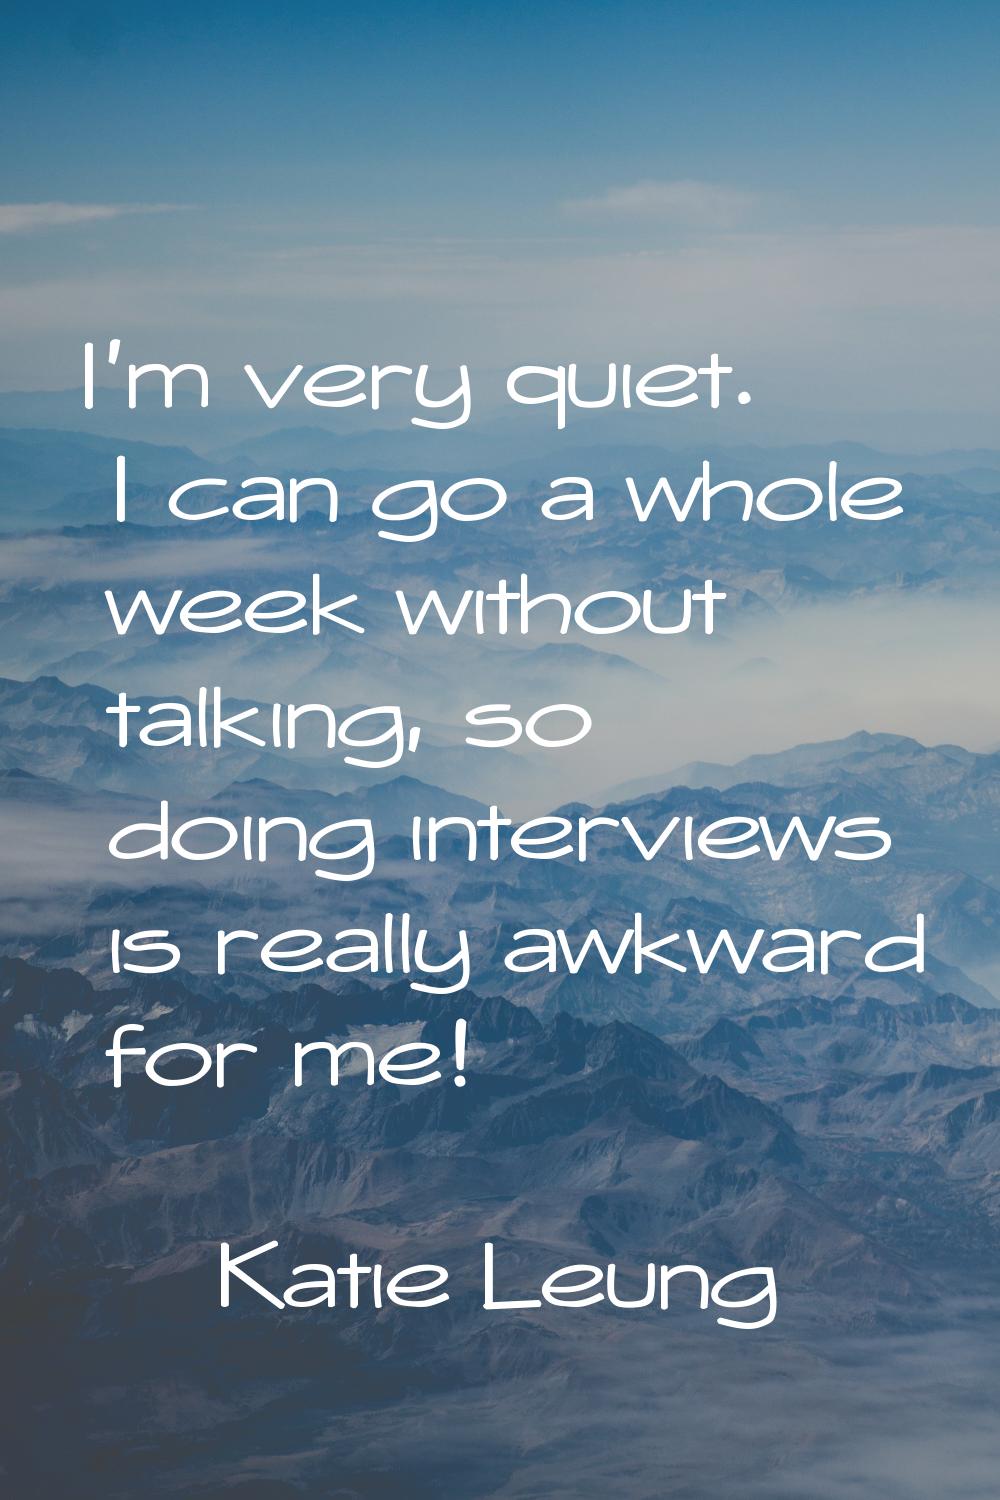 I'm very quiet. I can go a whole week without talking, so doing interviews is really awkward for me